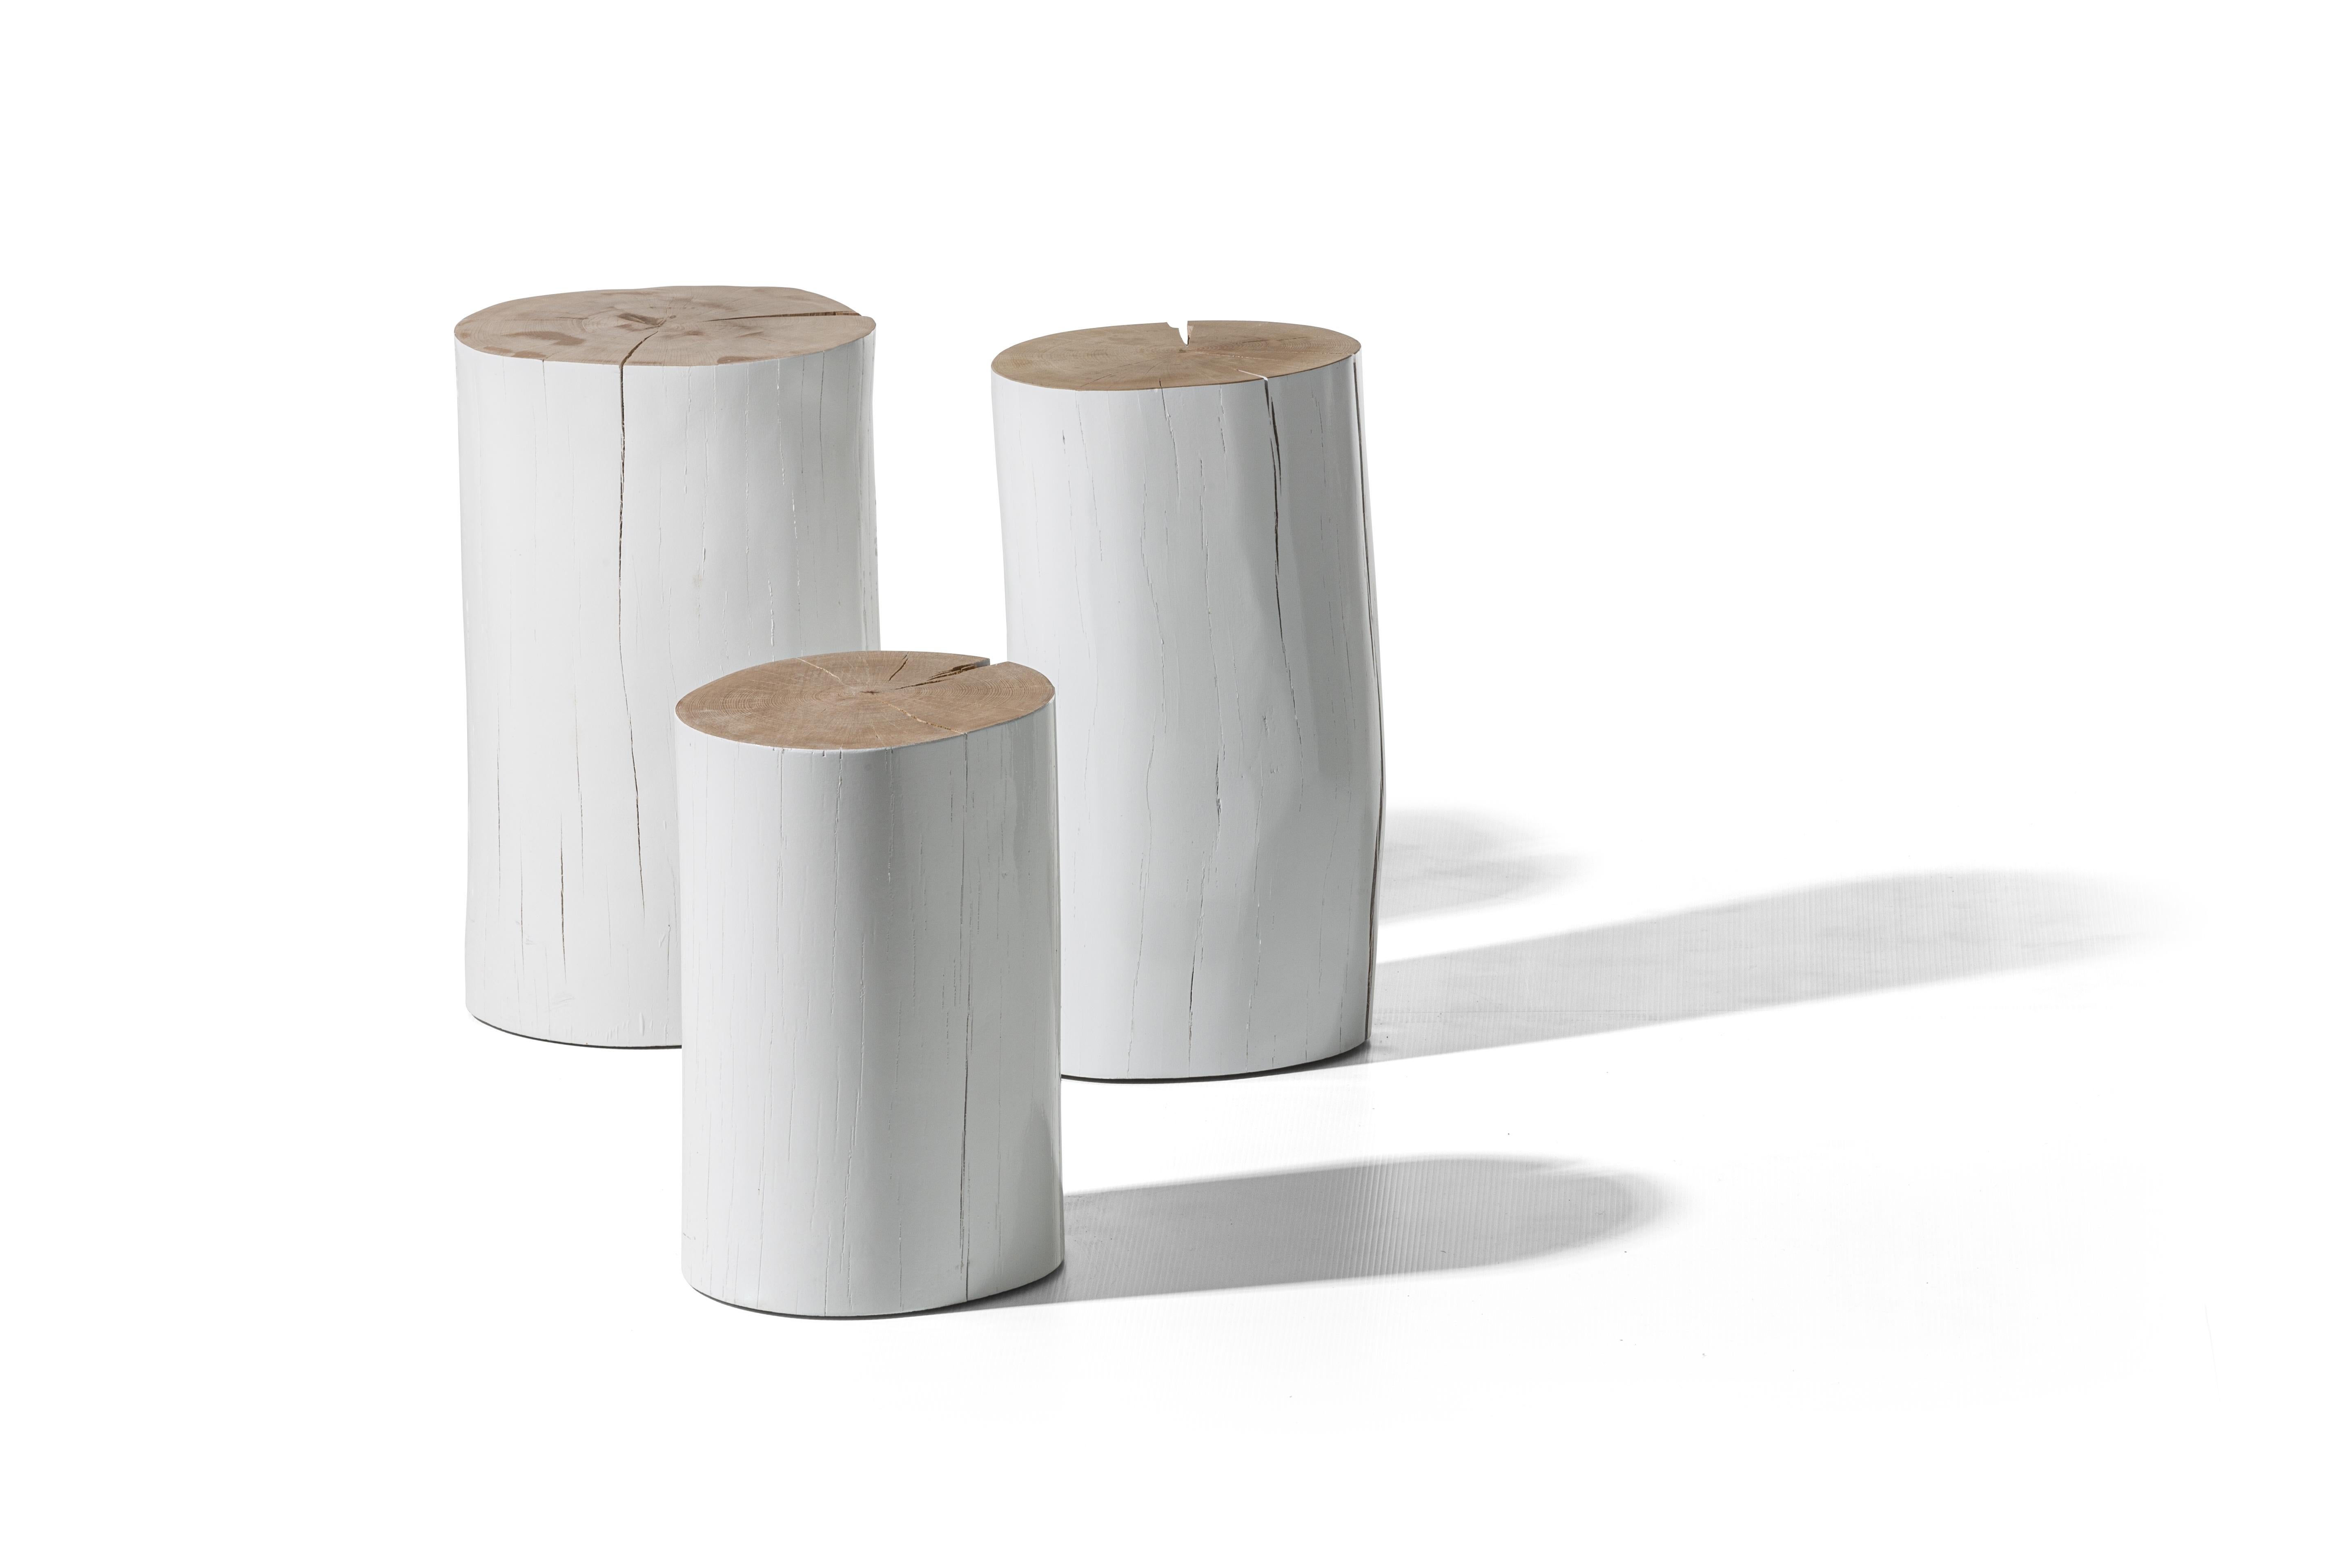 Sections of beech trunk, debarked and glossy black or white lacquered on the outside, give life to a family of unconventional coffee tables and poufs, offering a natural charm to any interior. In the characteristic cylinder shape of a trunk, they